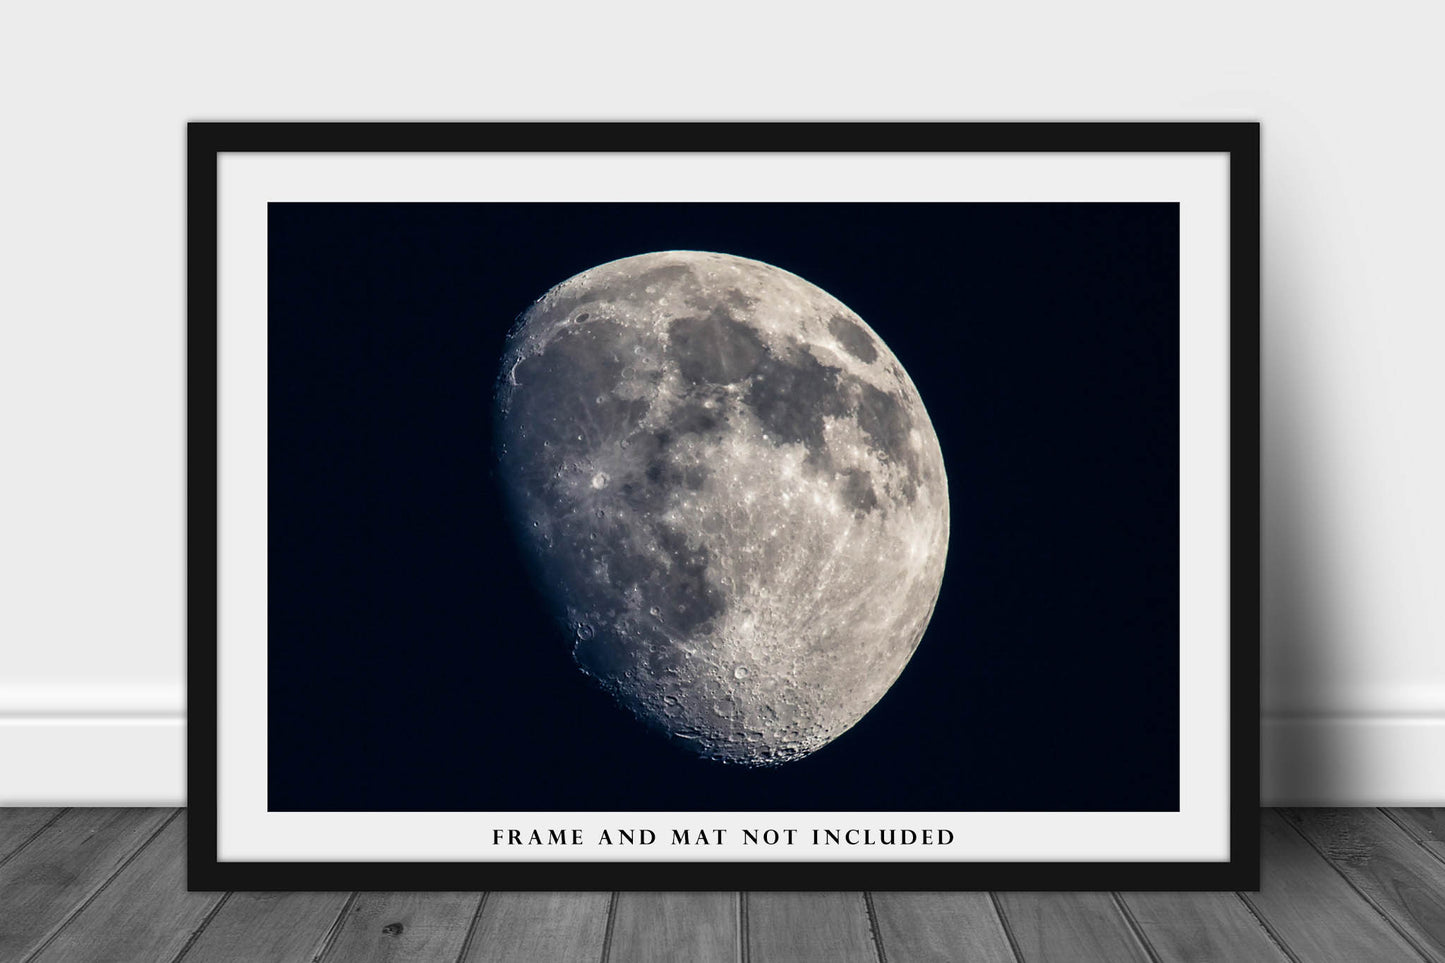 Lunar Photography Print (Not Framed) Picture of Waxing Gibbous Moon with Visible Craters in Oklahoma Night Sky Wall Art Celestial Decor